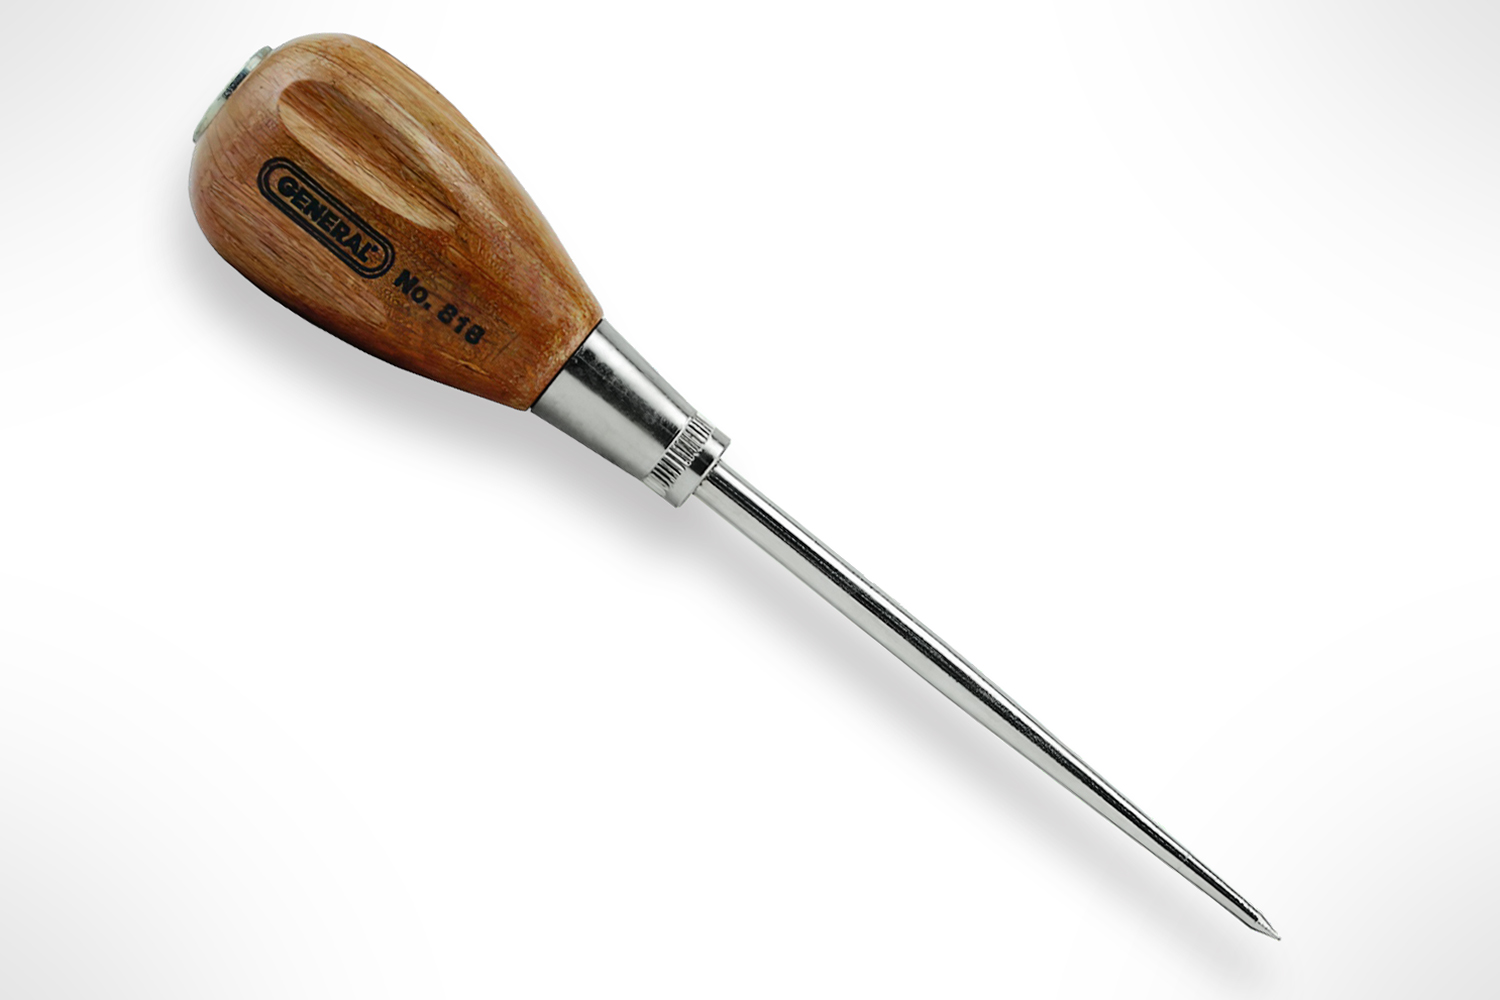 General Tools Scratch Awl Tool with Hardwood Handle - Scribe